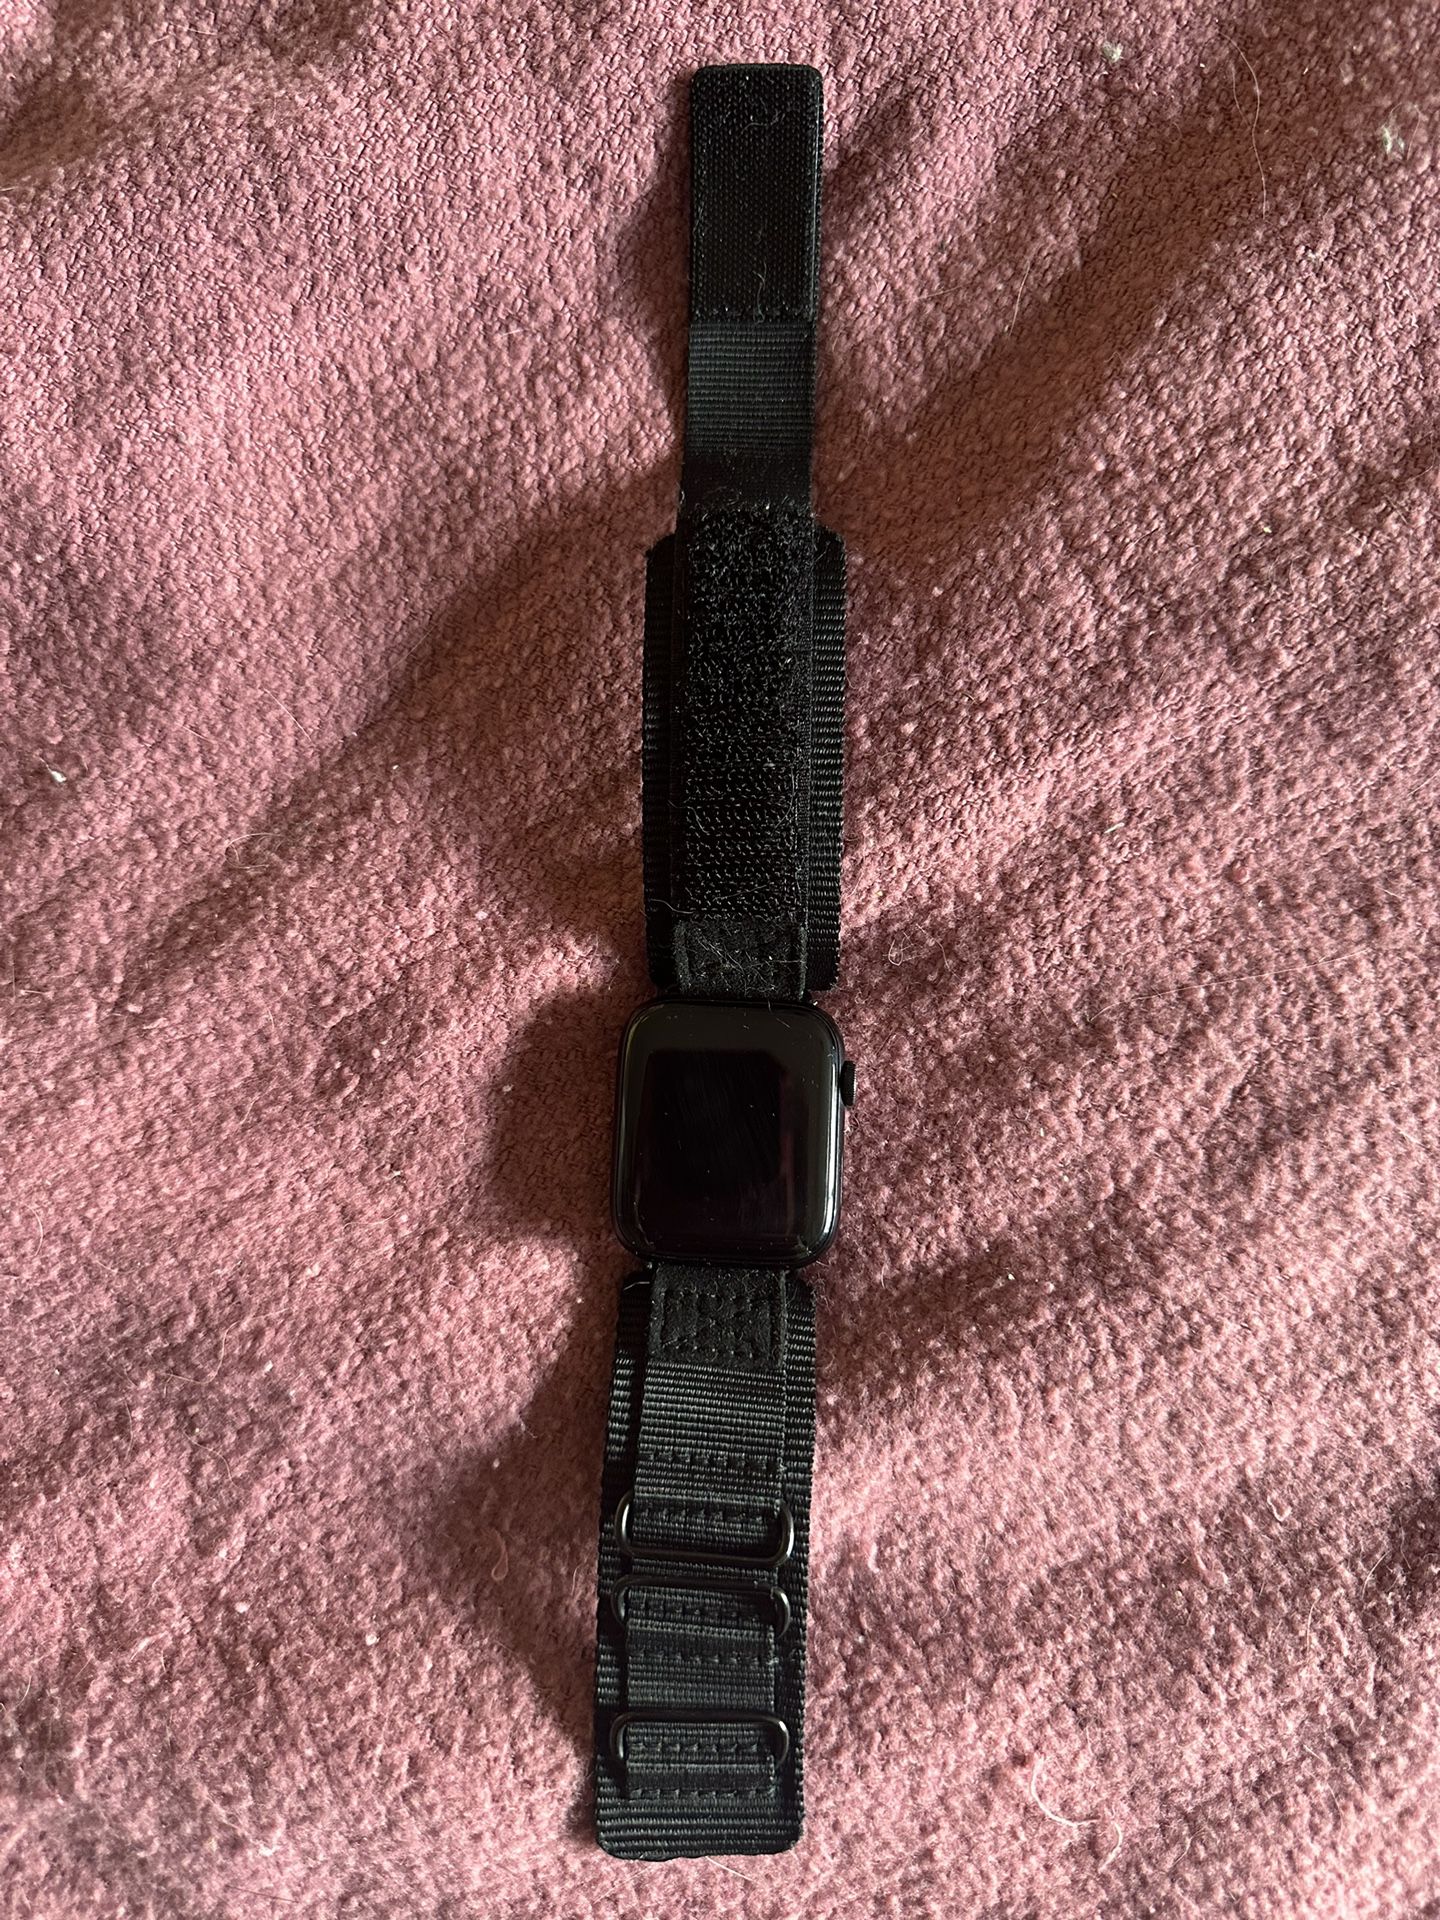 Apple Watch SE (2nd Gen) With Band